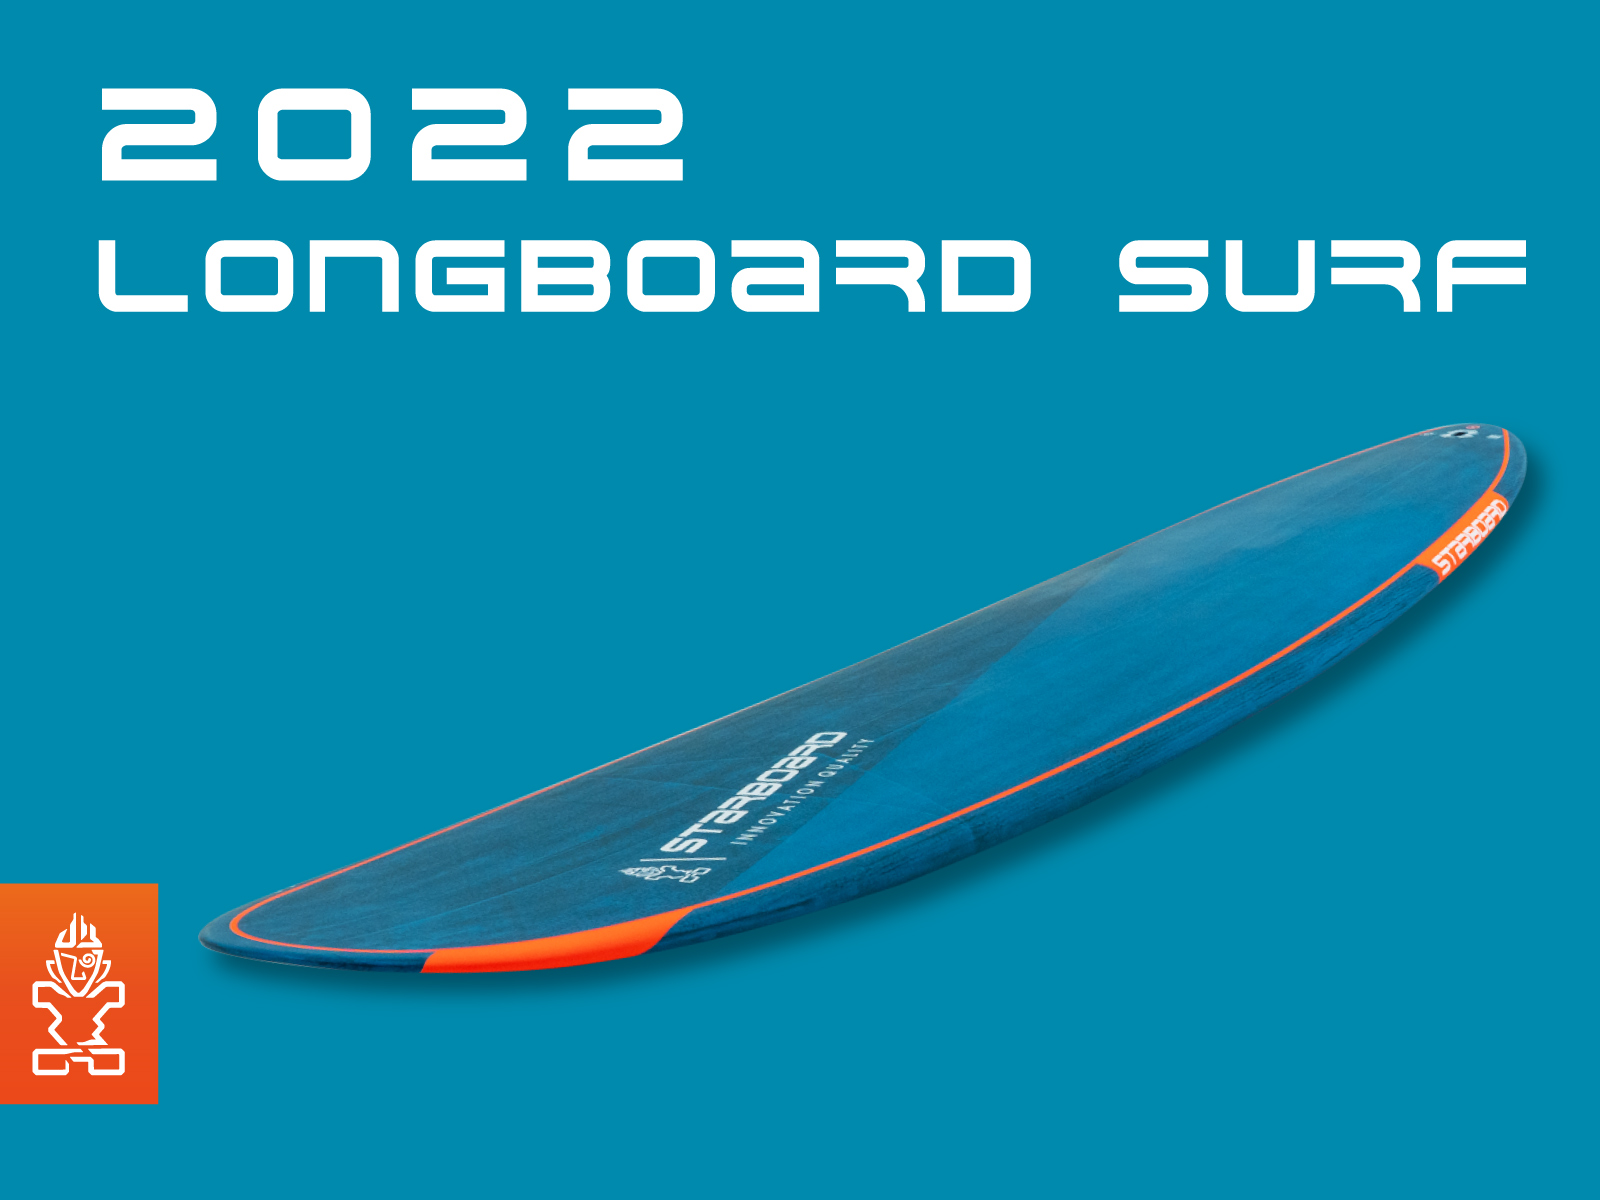 2022 Longboard Surf » Lightweight, Classic Design » by Starboard SUP